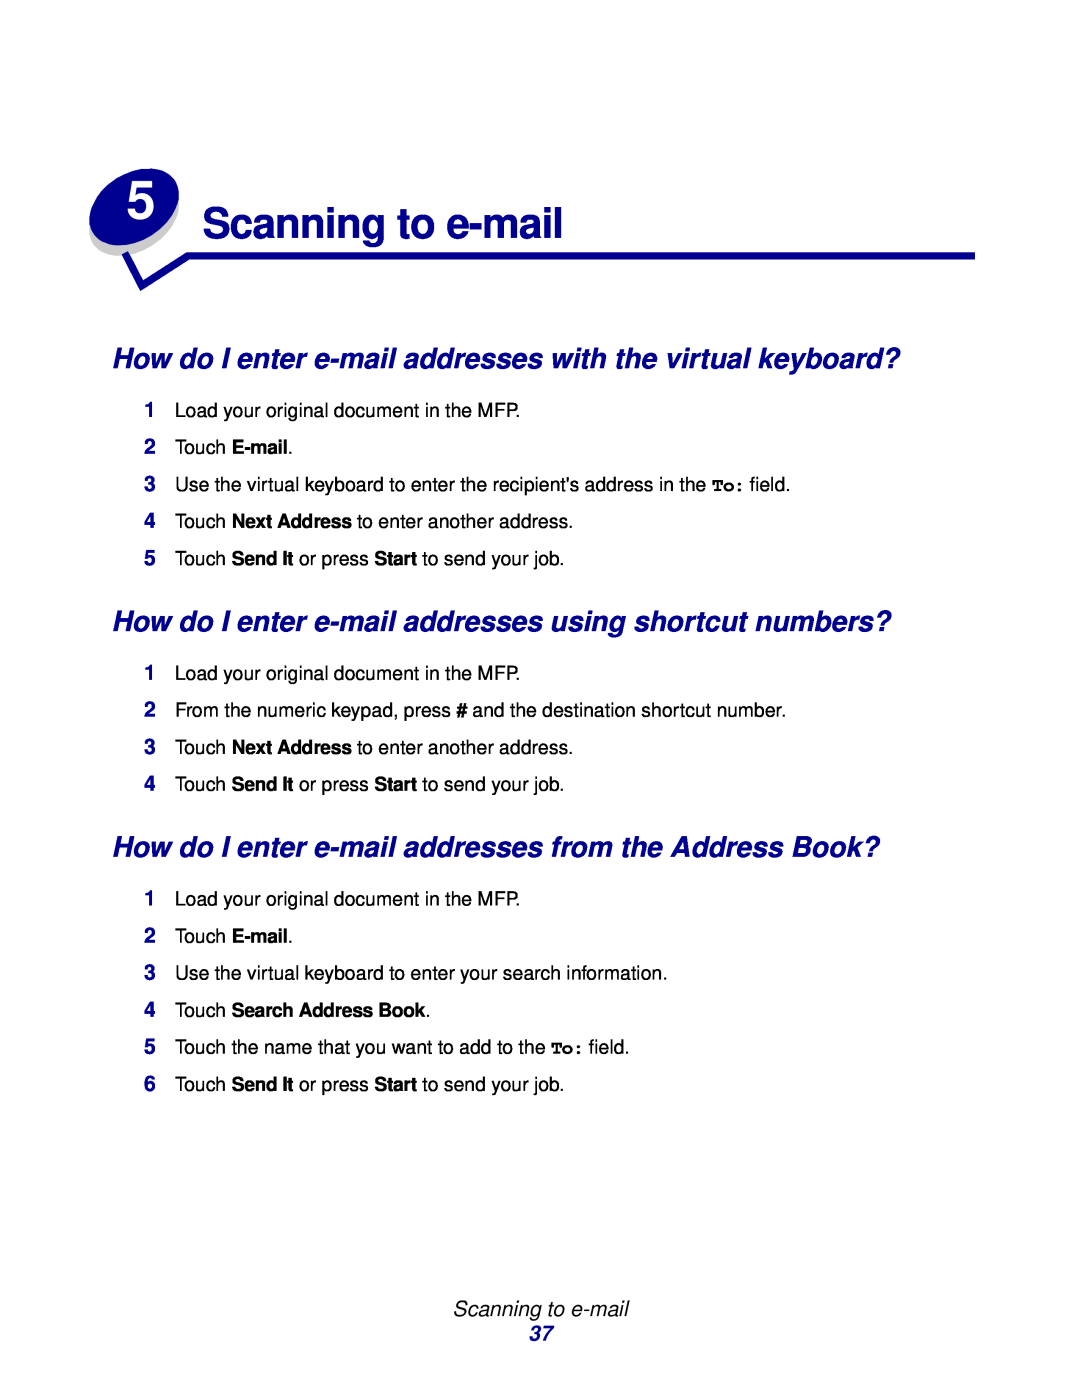 IBM MFP 30 manual How do I enter e-mail addresses with the virtual keyboard?, Scanning to e-mail, Touch Search Address Book 